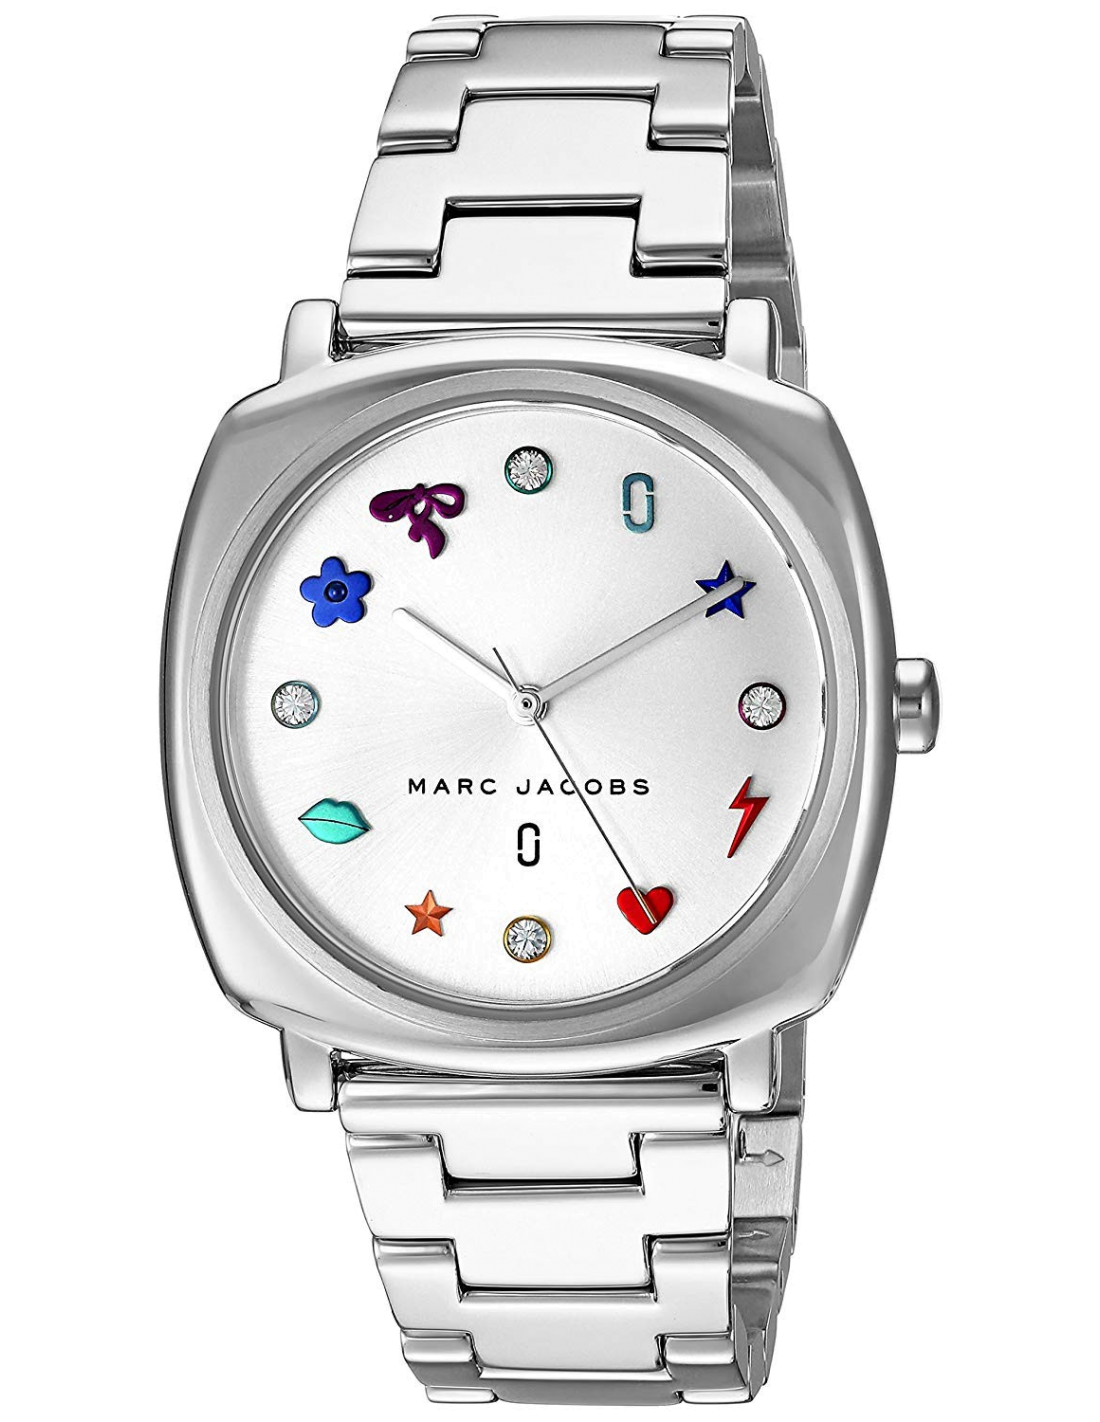 Marc Jacobs Mandy Silver Dial Silver Stainless Steel Strap Watch for Women - MJ3548